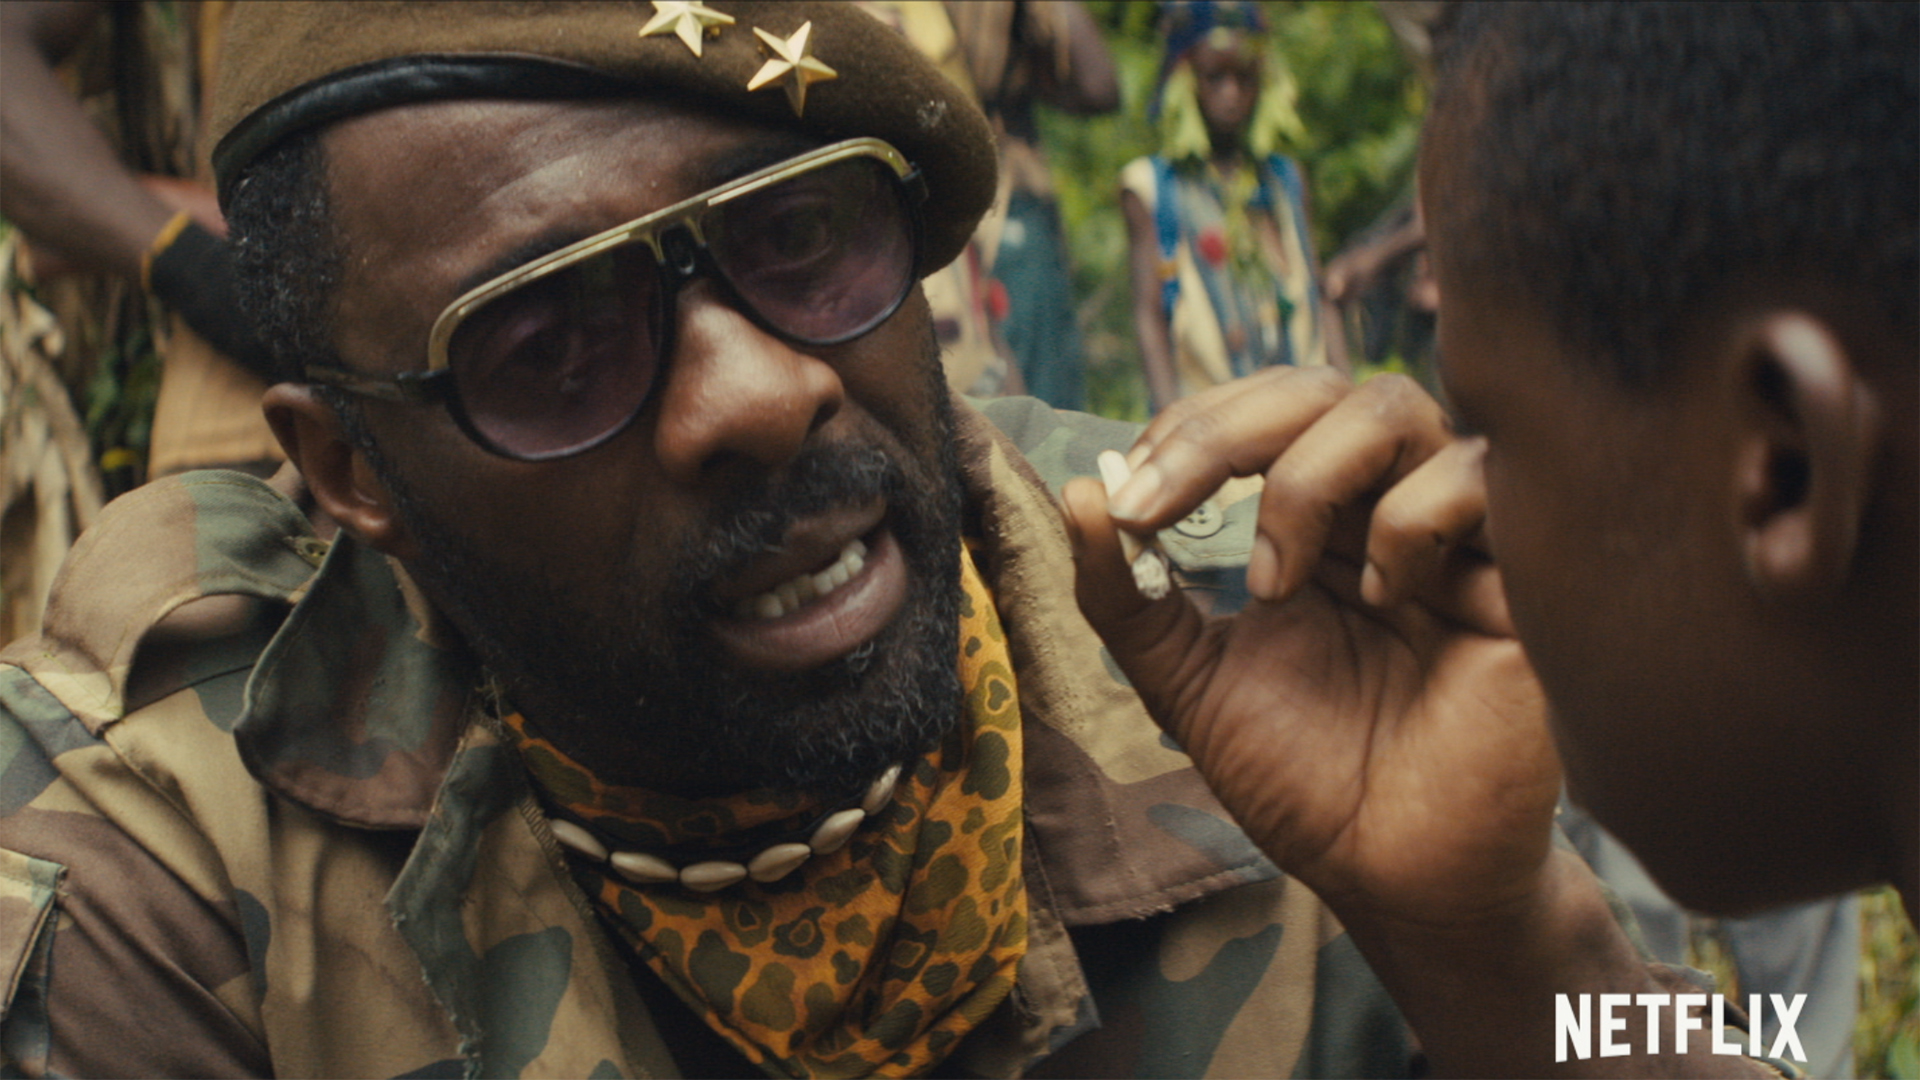 Beasts of No Nation' review: A study of manipulation, manufactured loyalty Washington Post